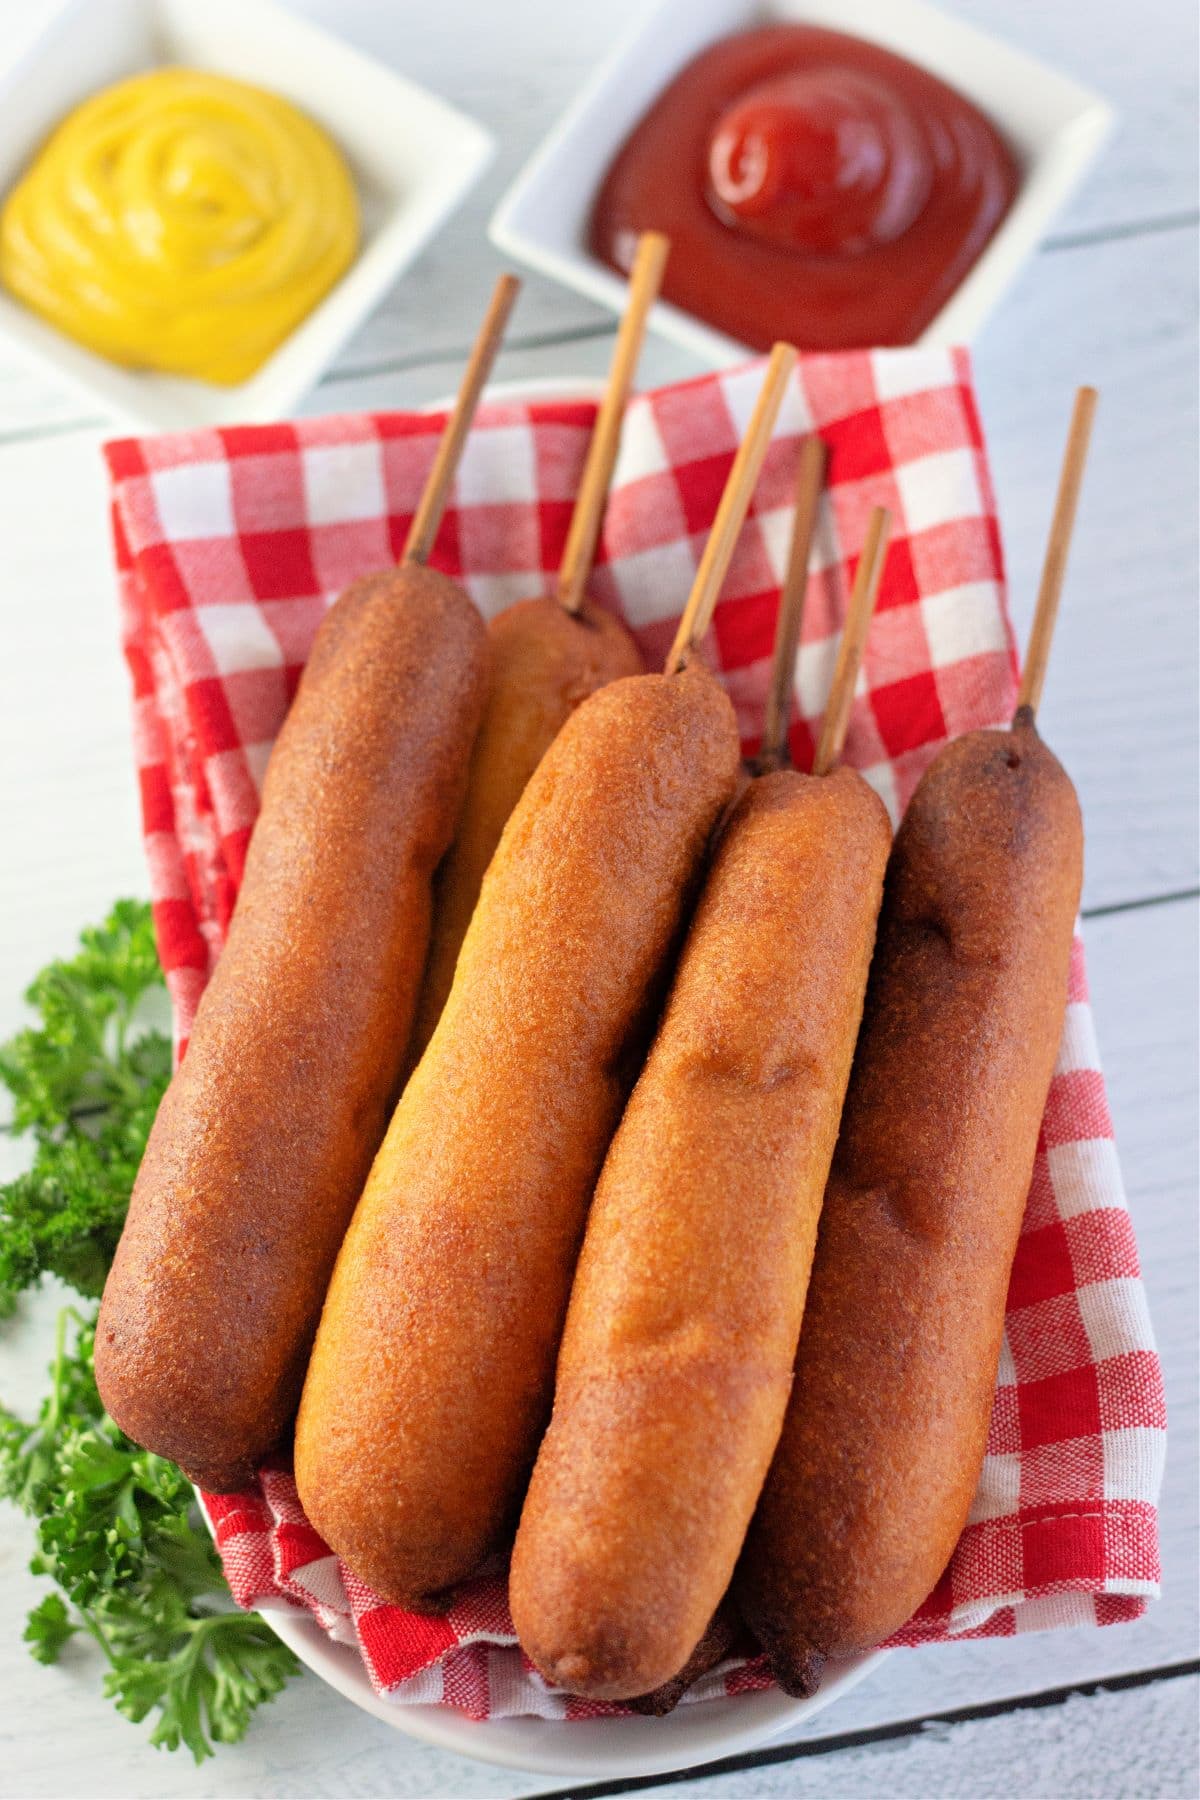 six corn dogs on a red and white checkerboard cloth with ketchup and mustard in dishes